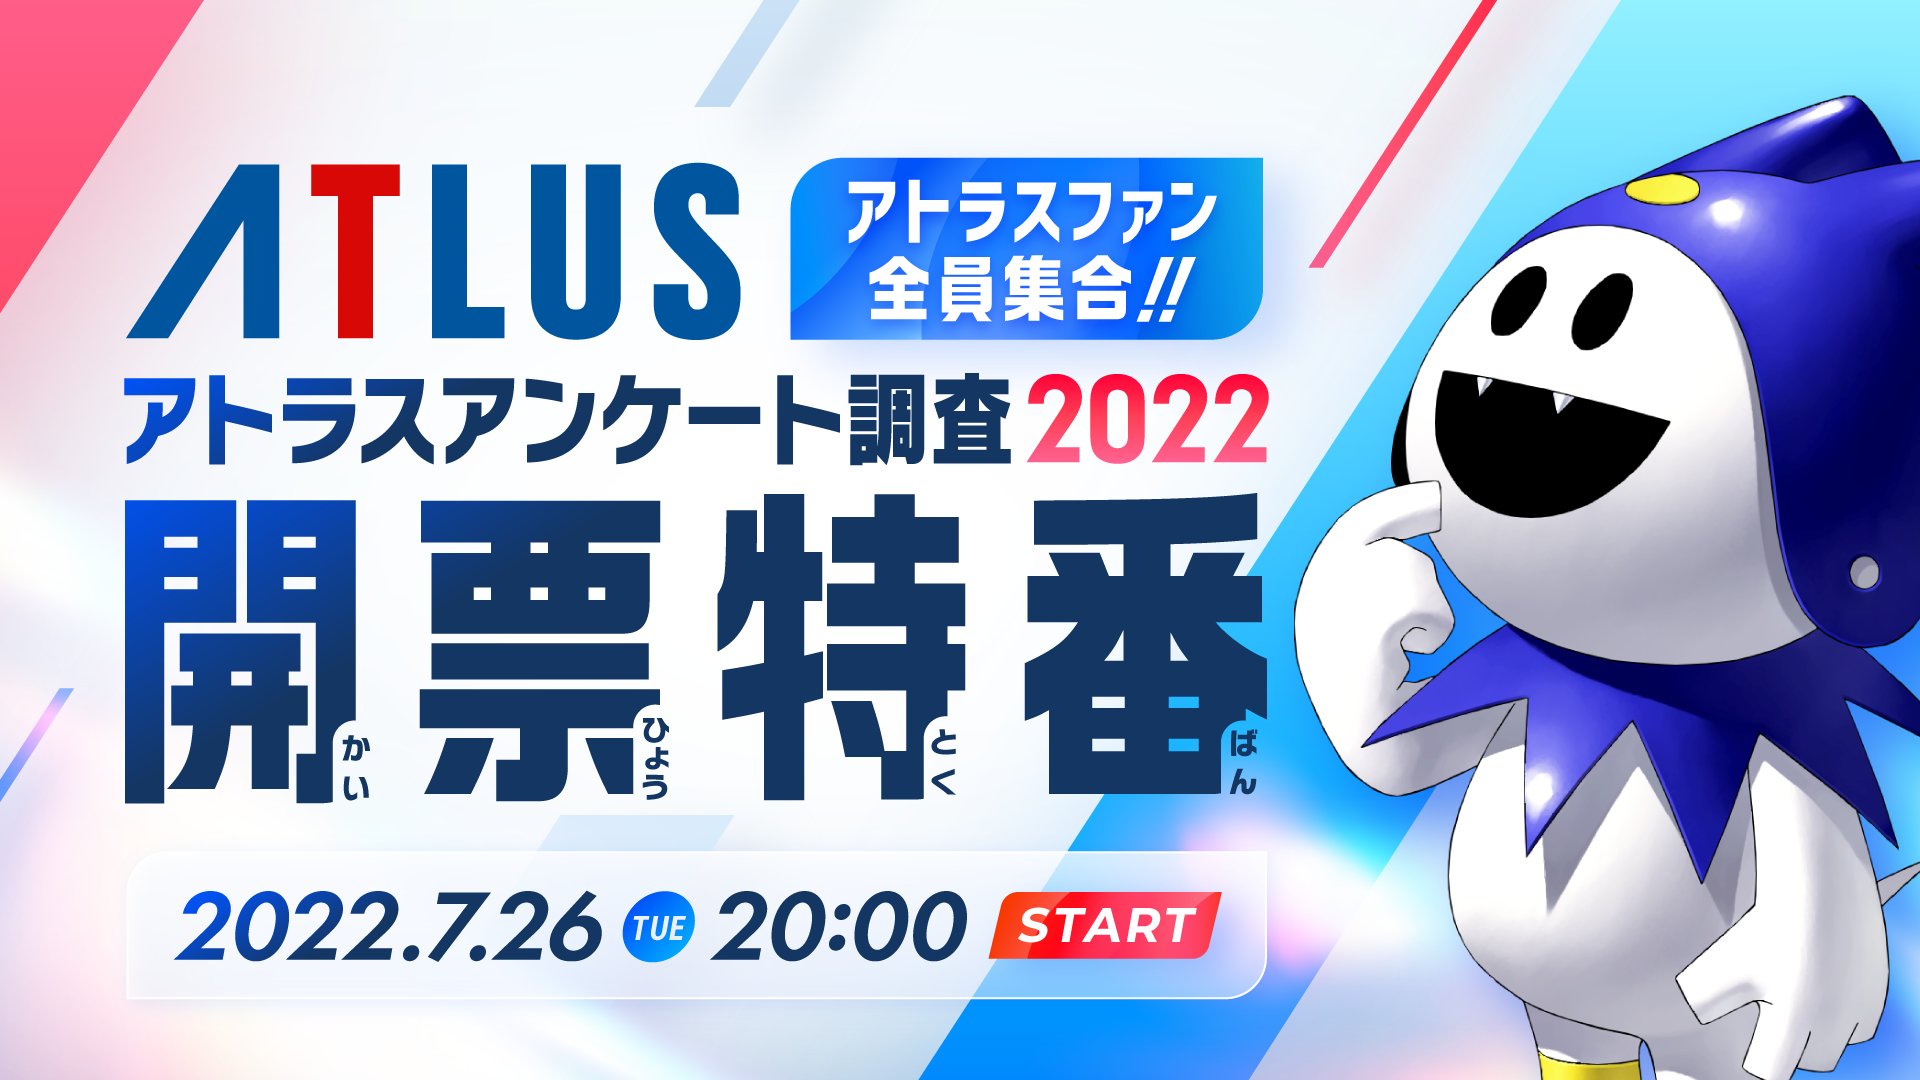 #
      ATLUS Survey 2022 Results Special broadcast set for July 26